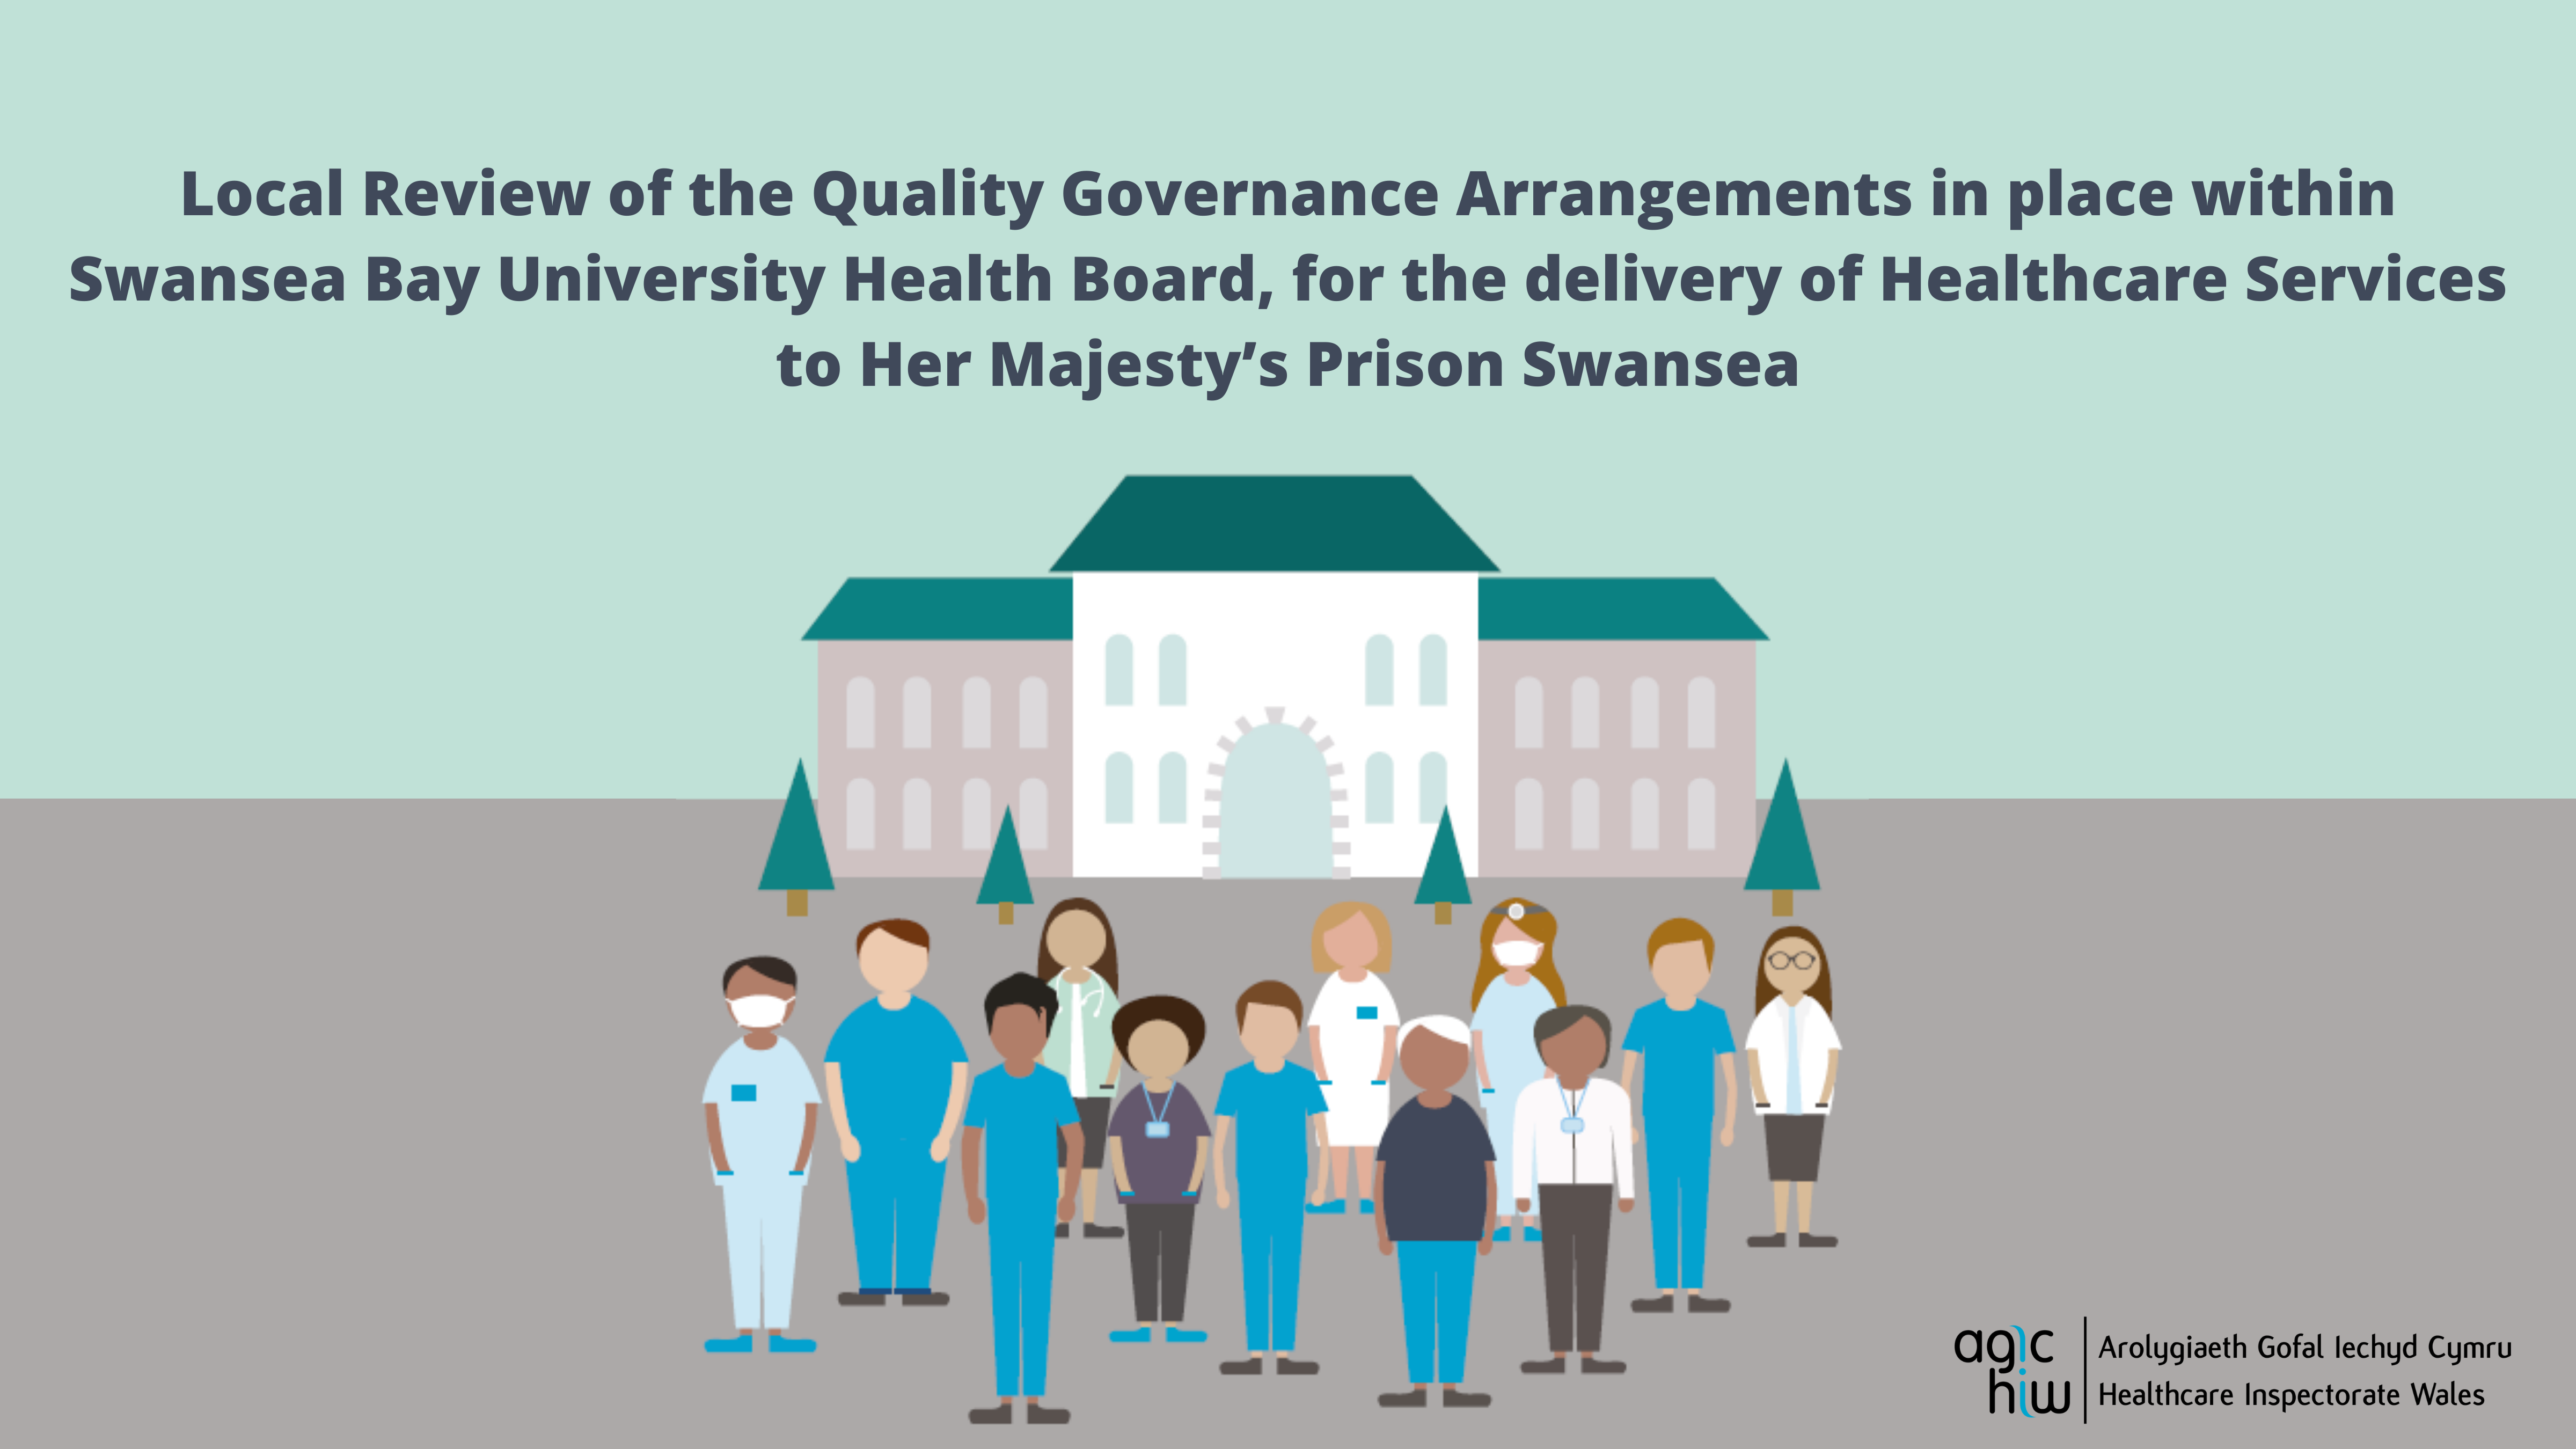 Local Review of Governance Arrangements at Swansea Bay University Health Board for the Provision of Healthcare services to Her Majesty’s Prison Swansea